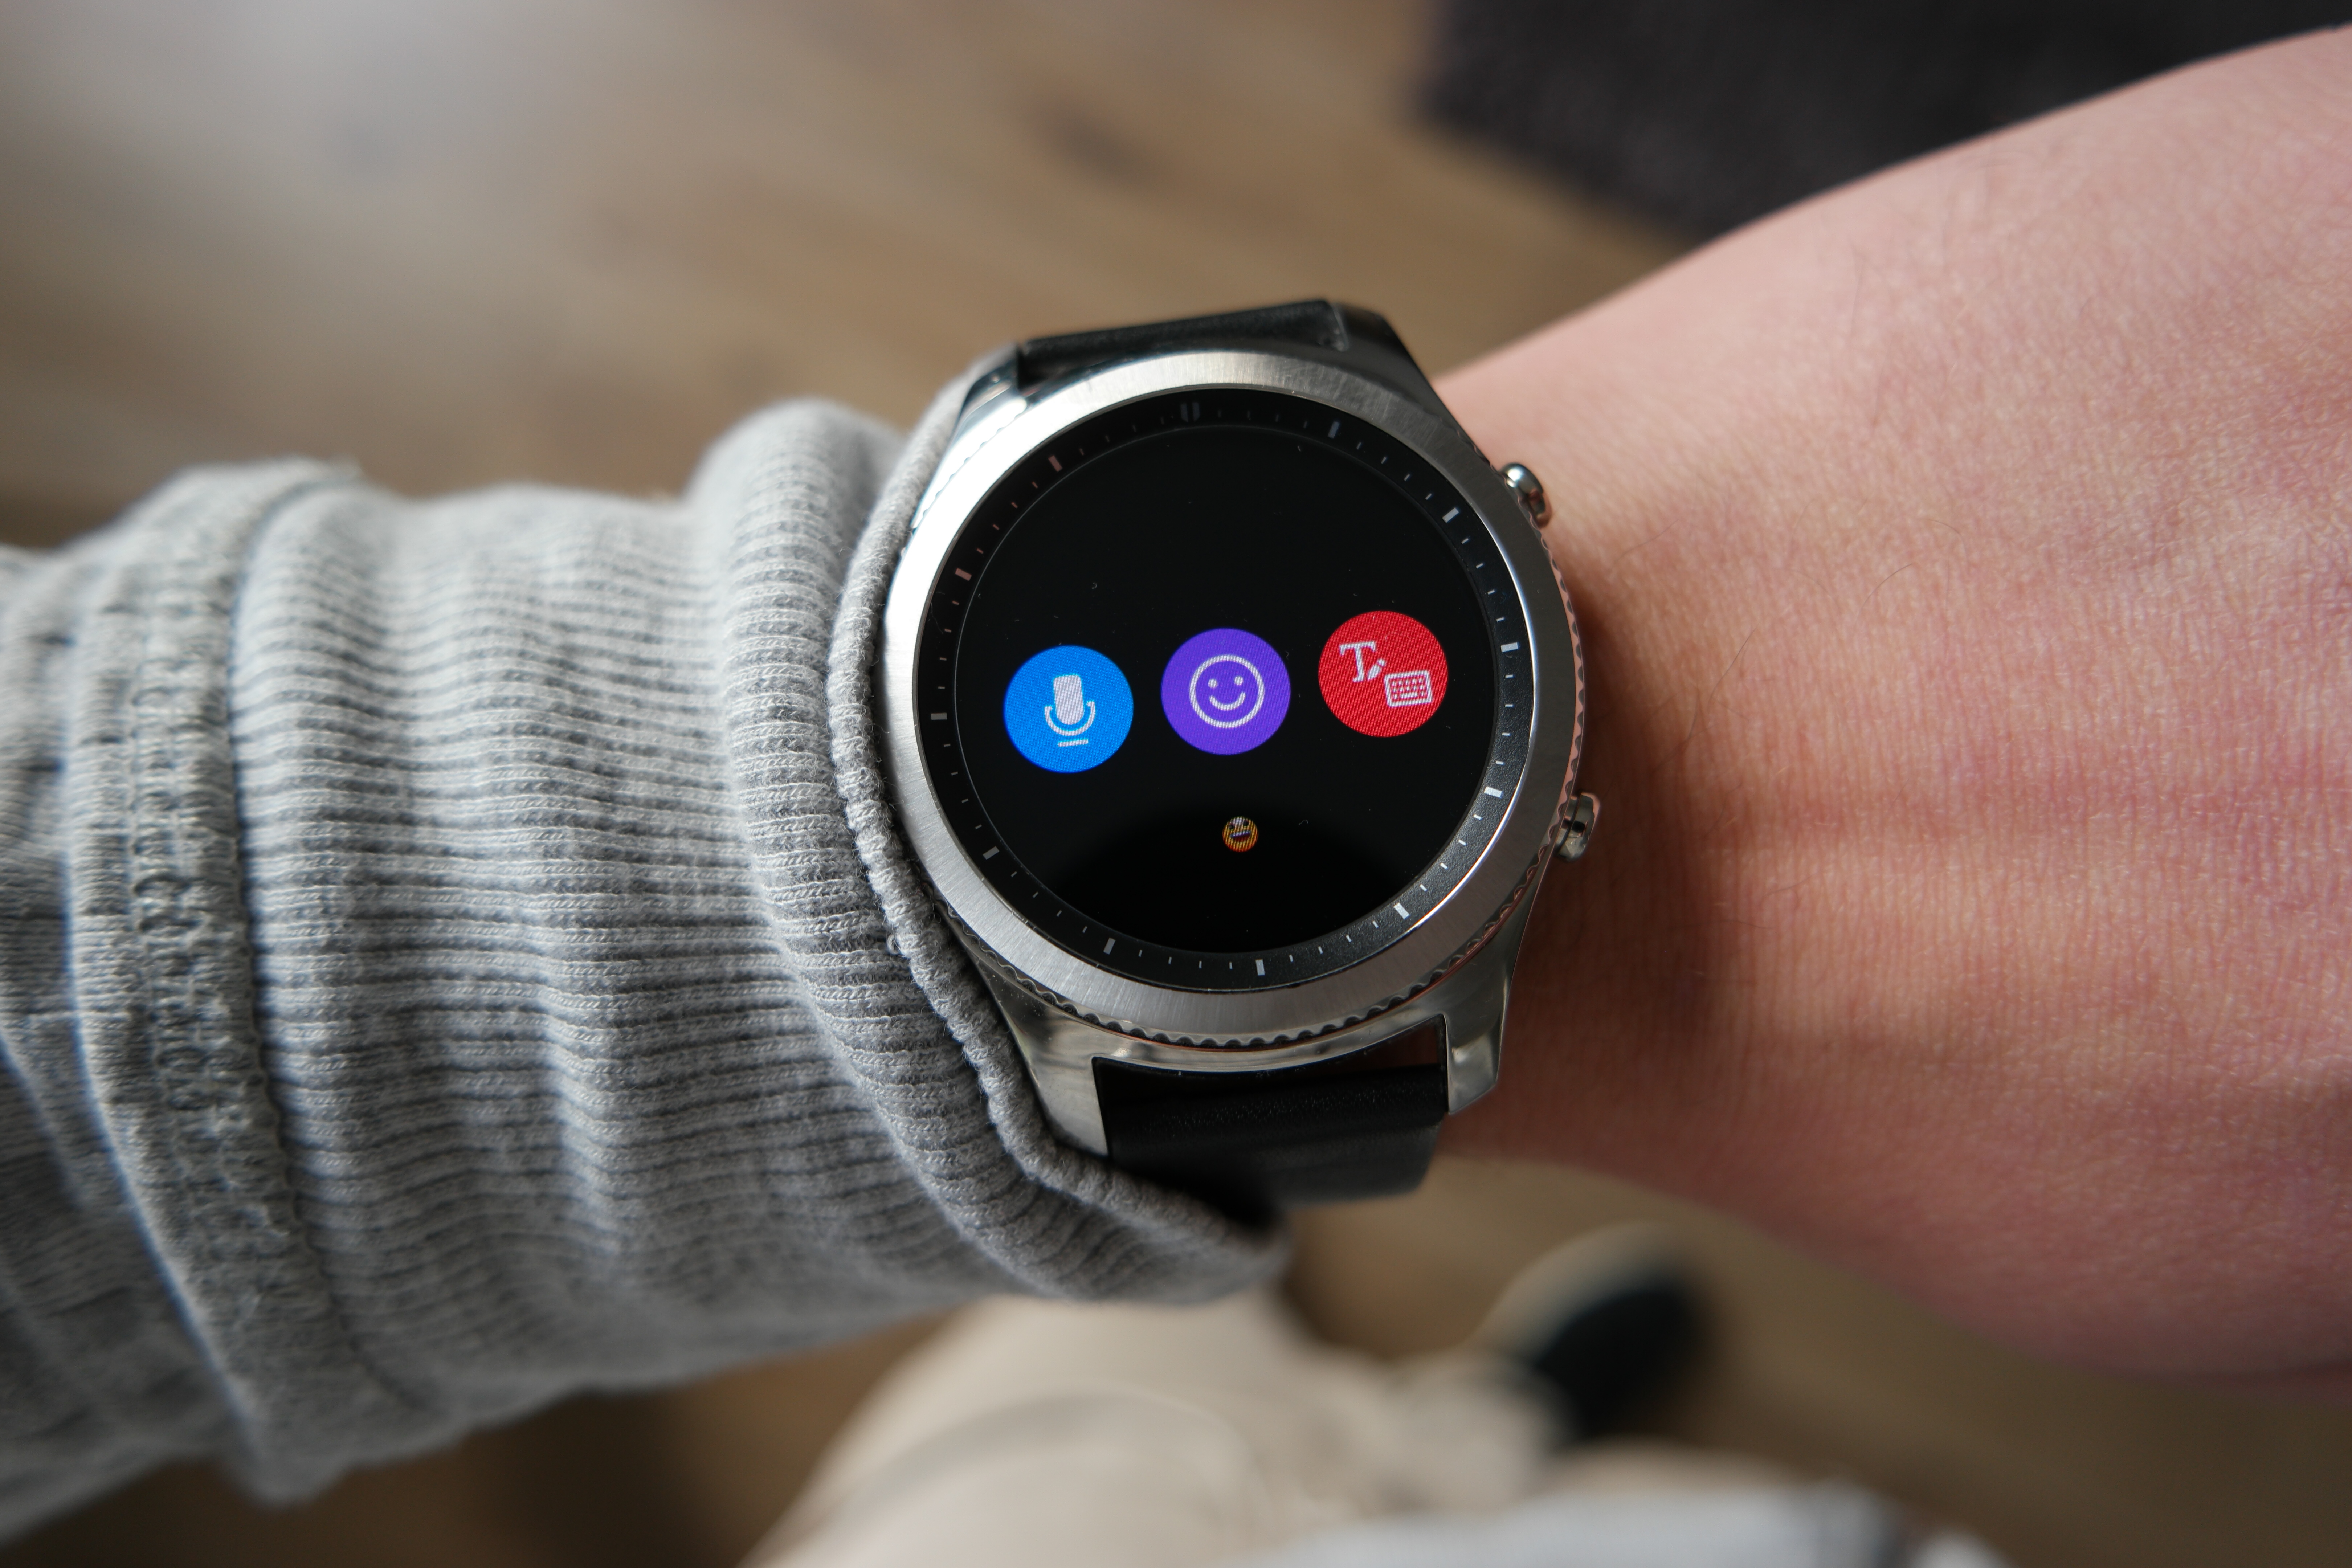 Gear S3 features work with the iPhone 